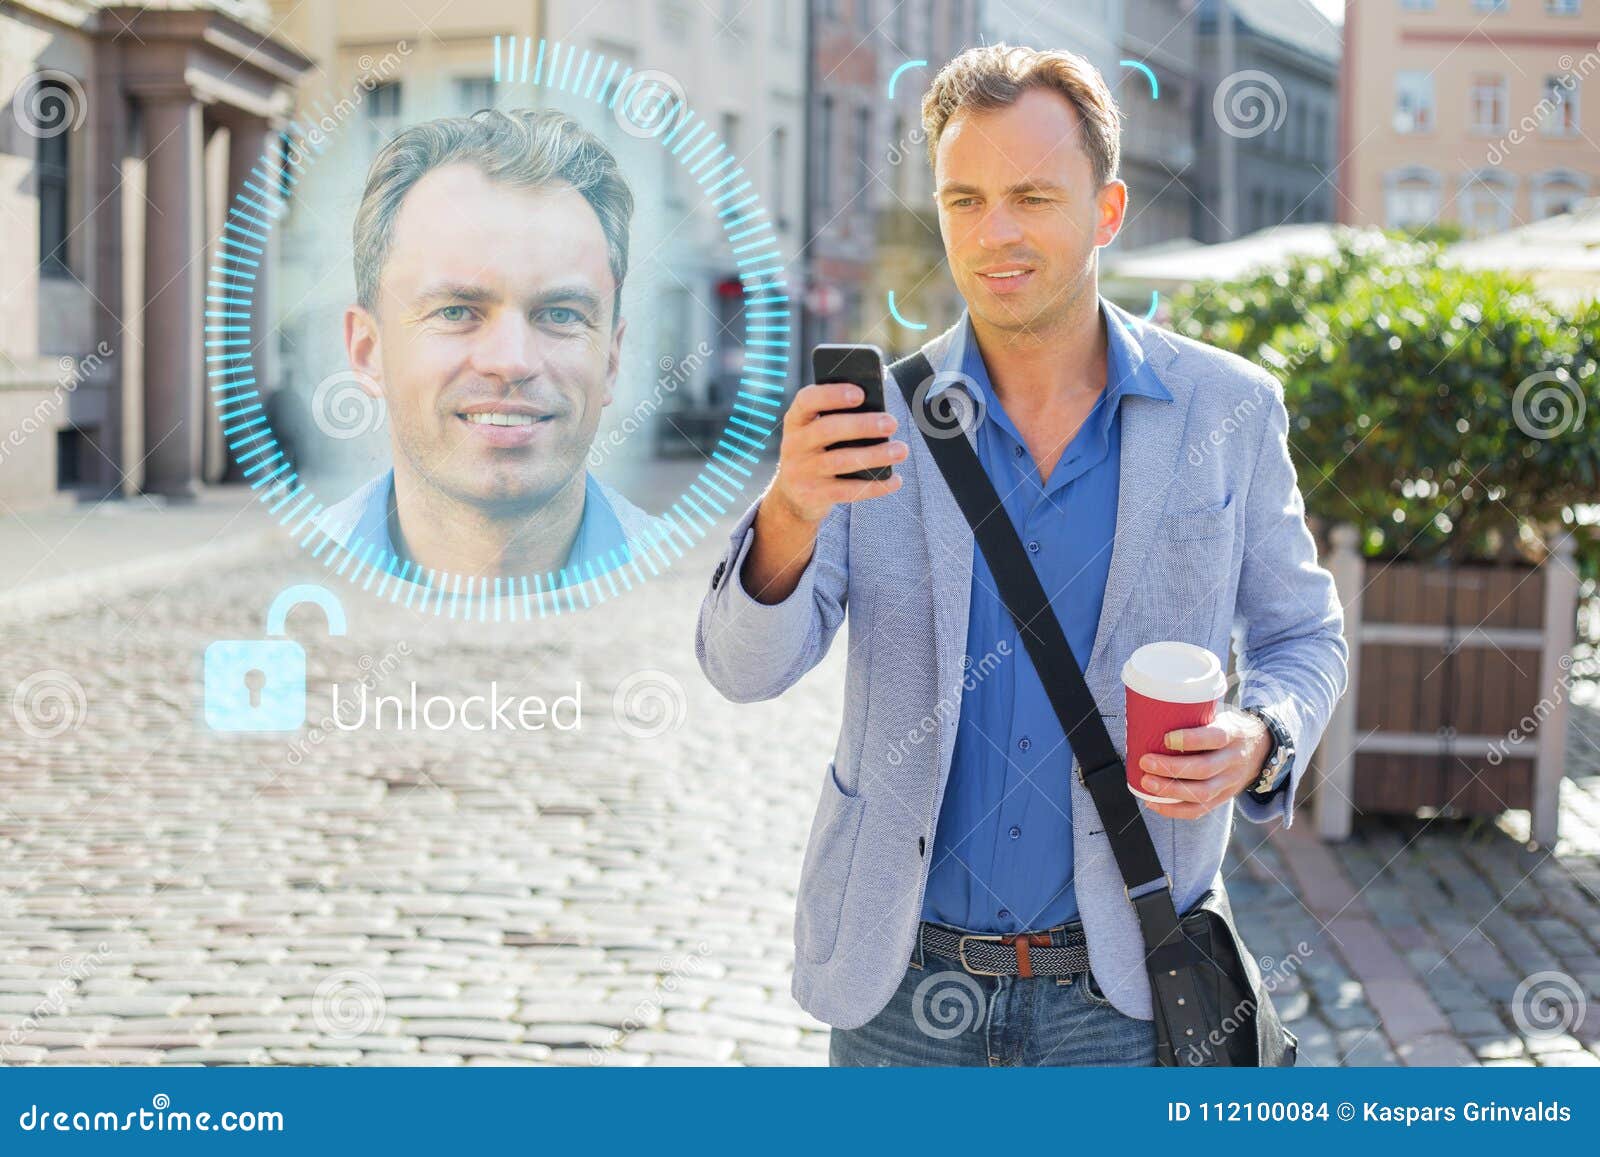 man unlock his mobile phone with facial recognition and authentication technology